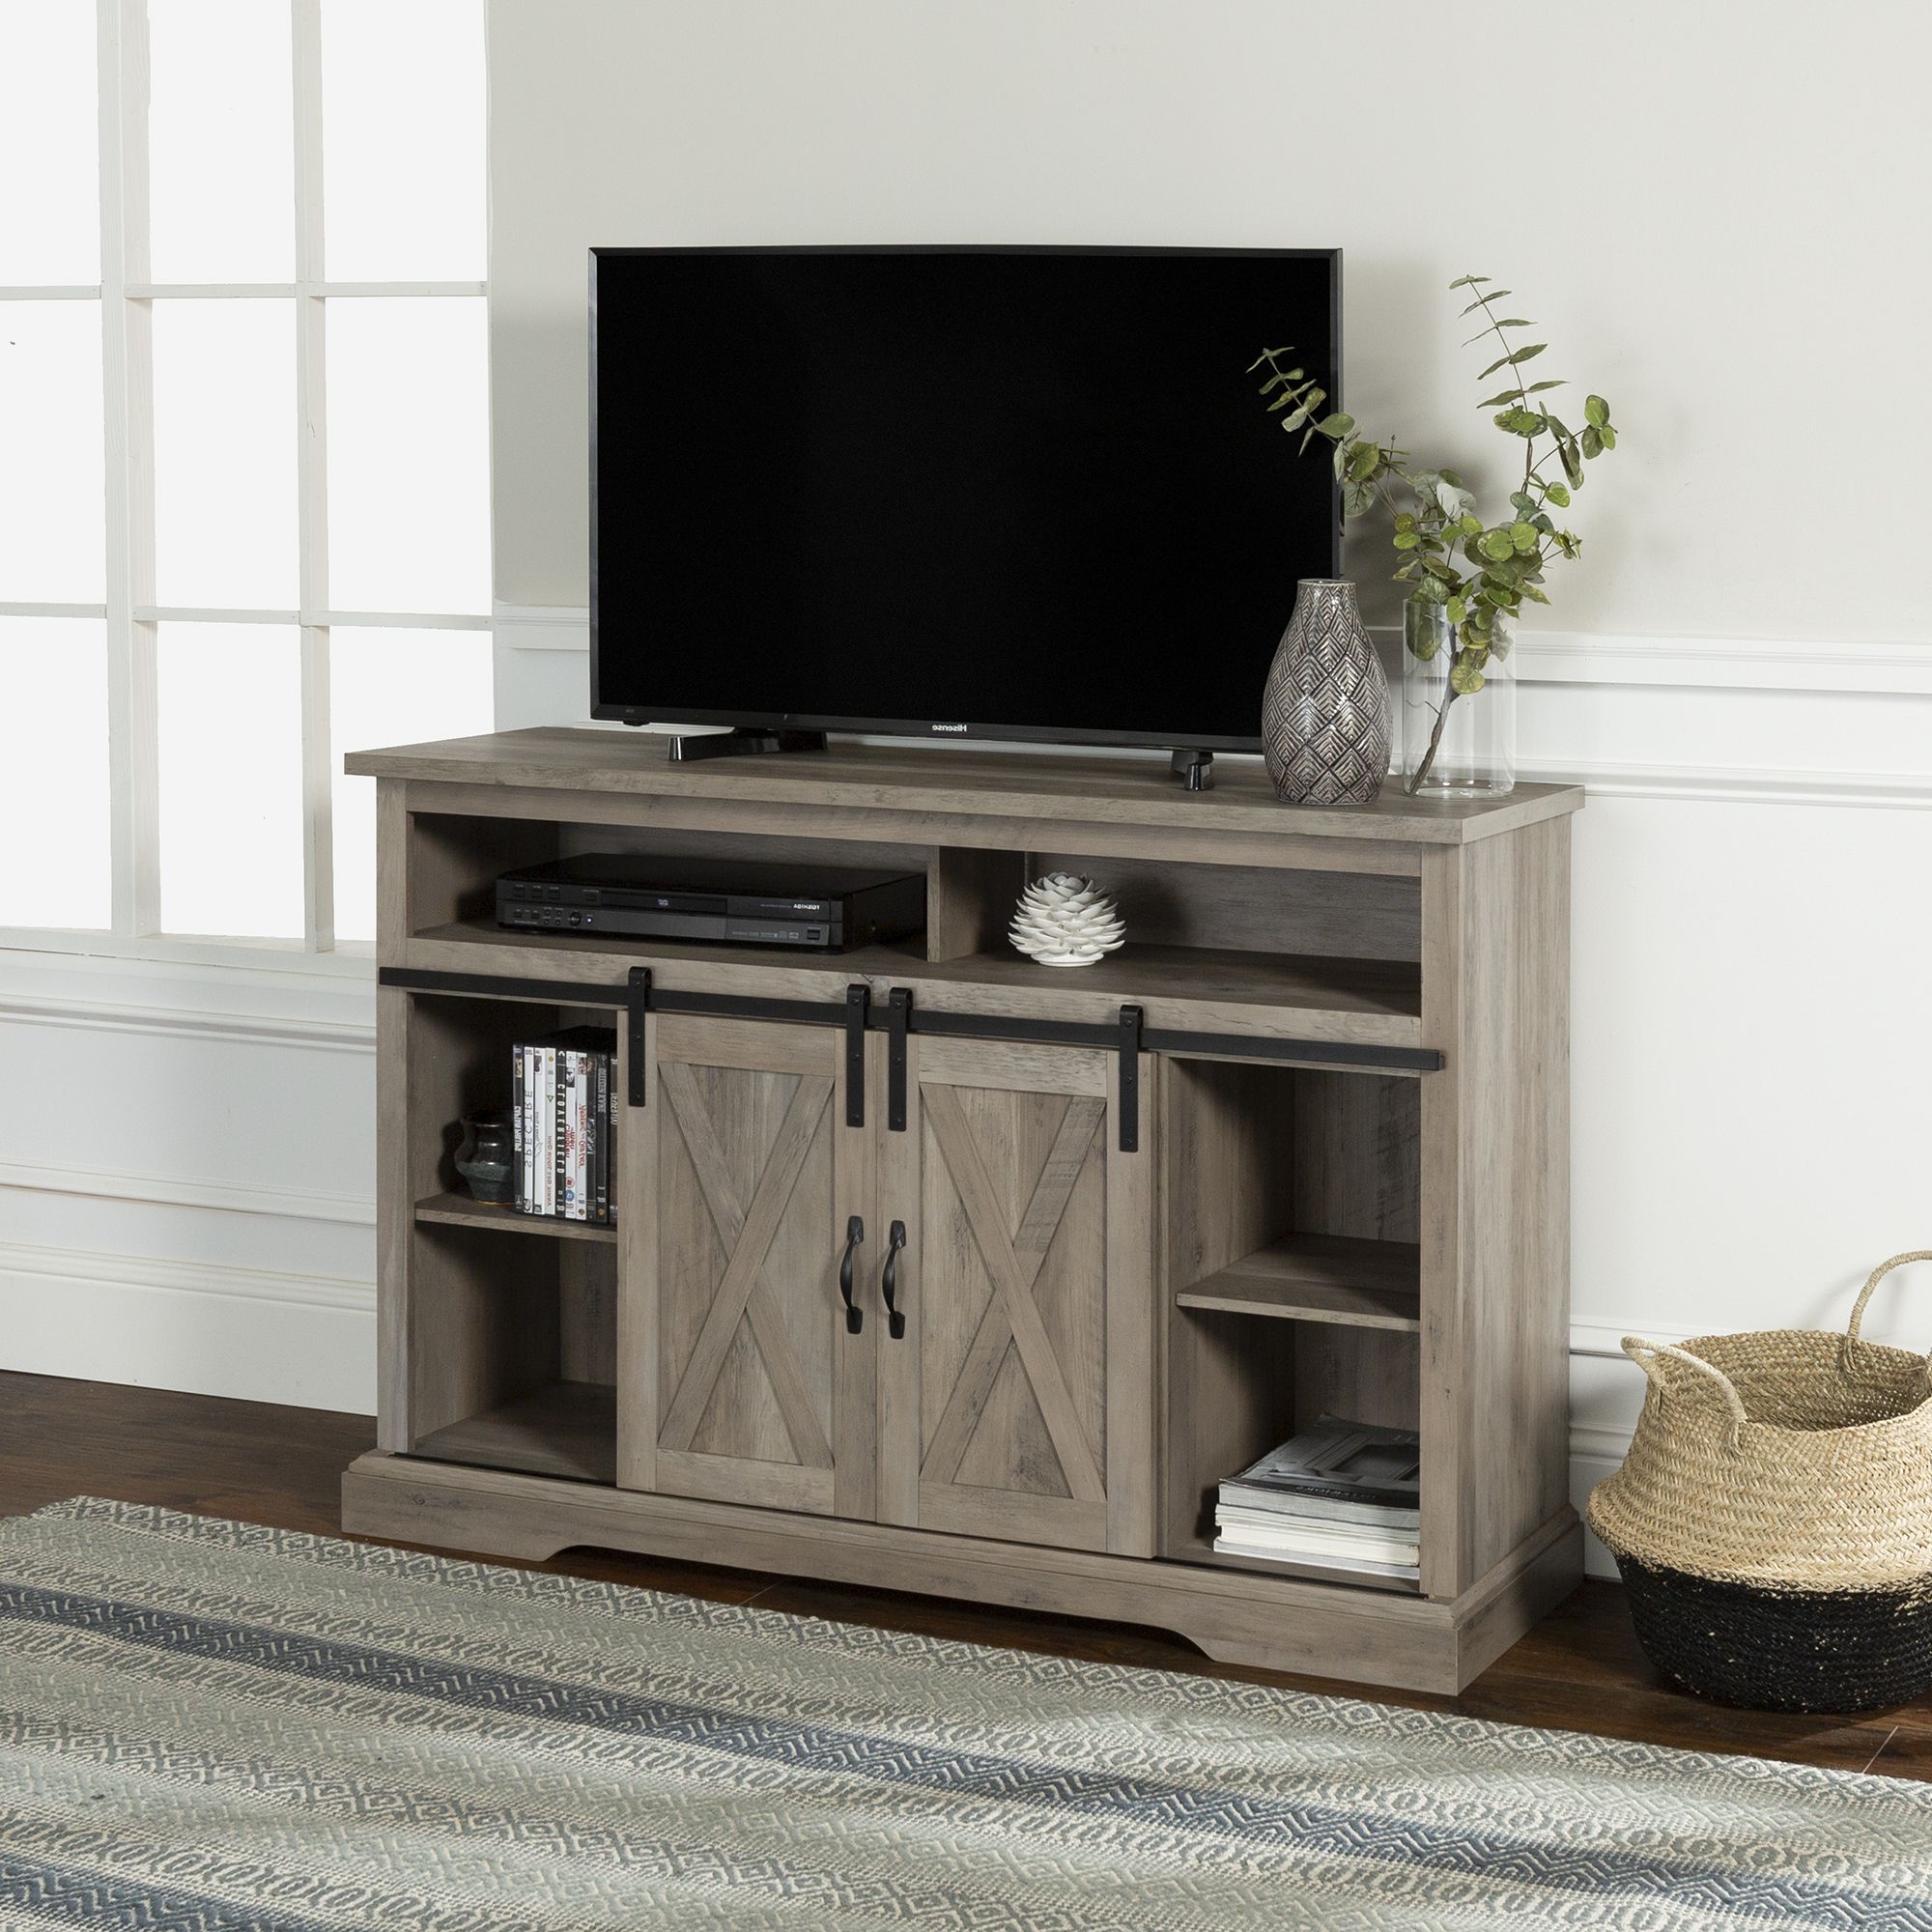 Manor Park Farmhouse Barn Door Tv Stand For Tvs Up To 58 Inside Kamari Tv Stands For Tvs Up To 58" (Gallery 5 of 20)